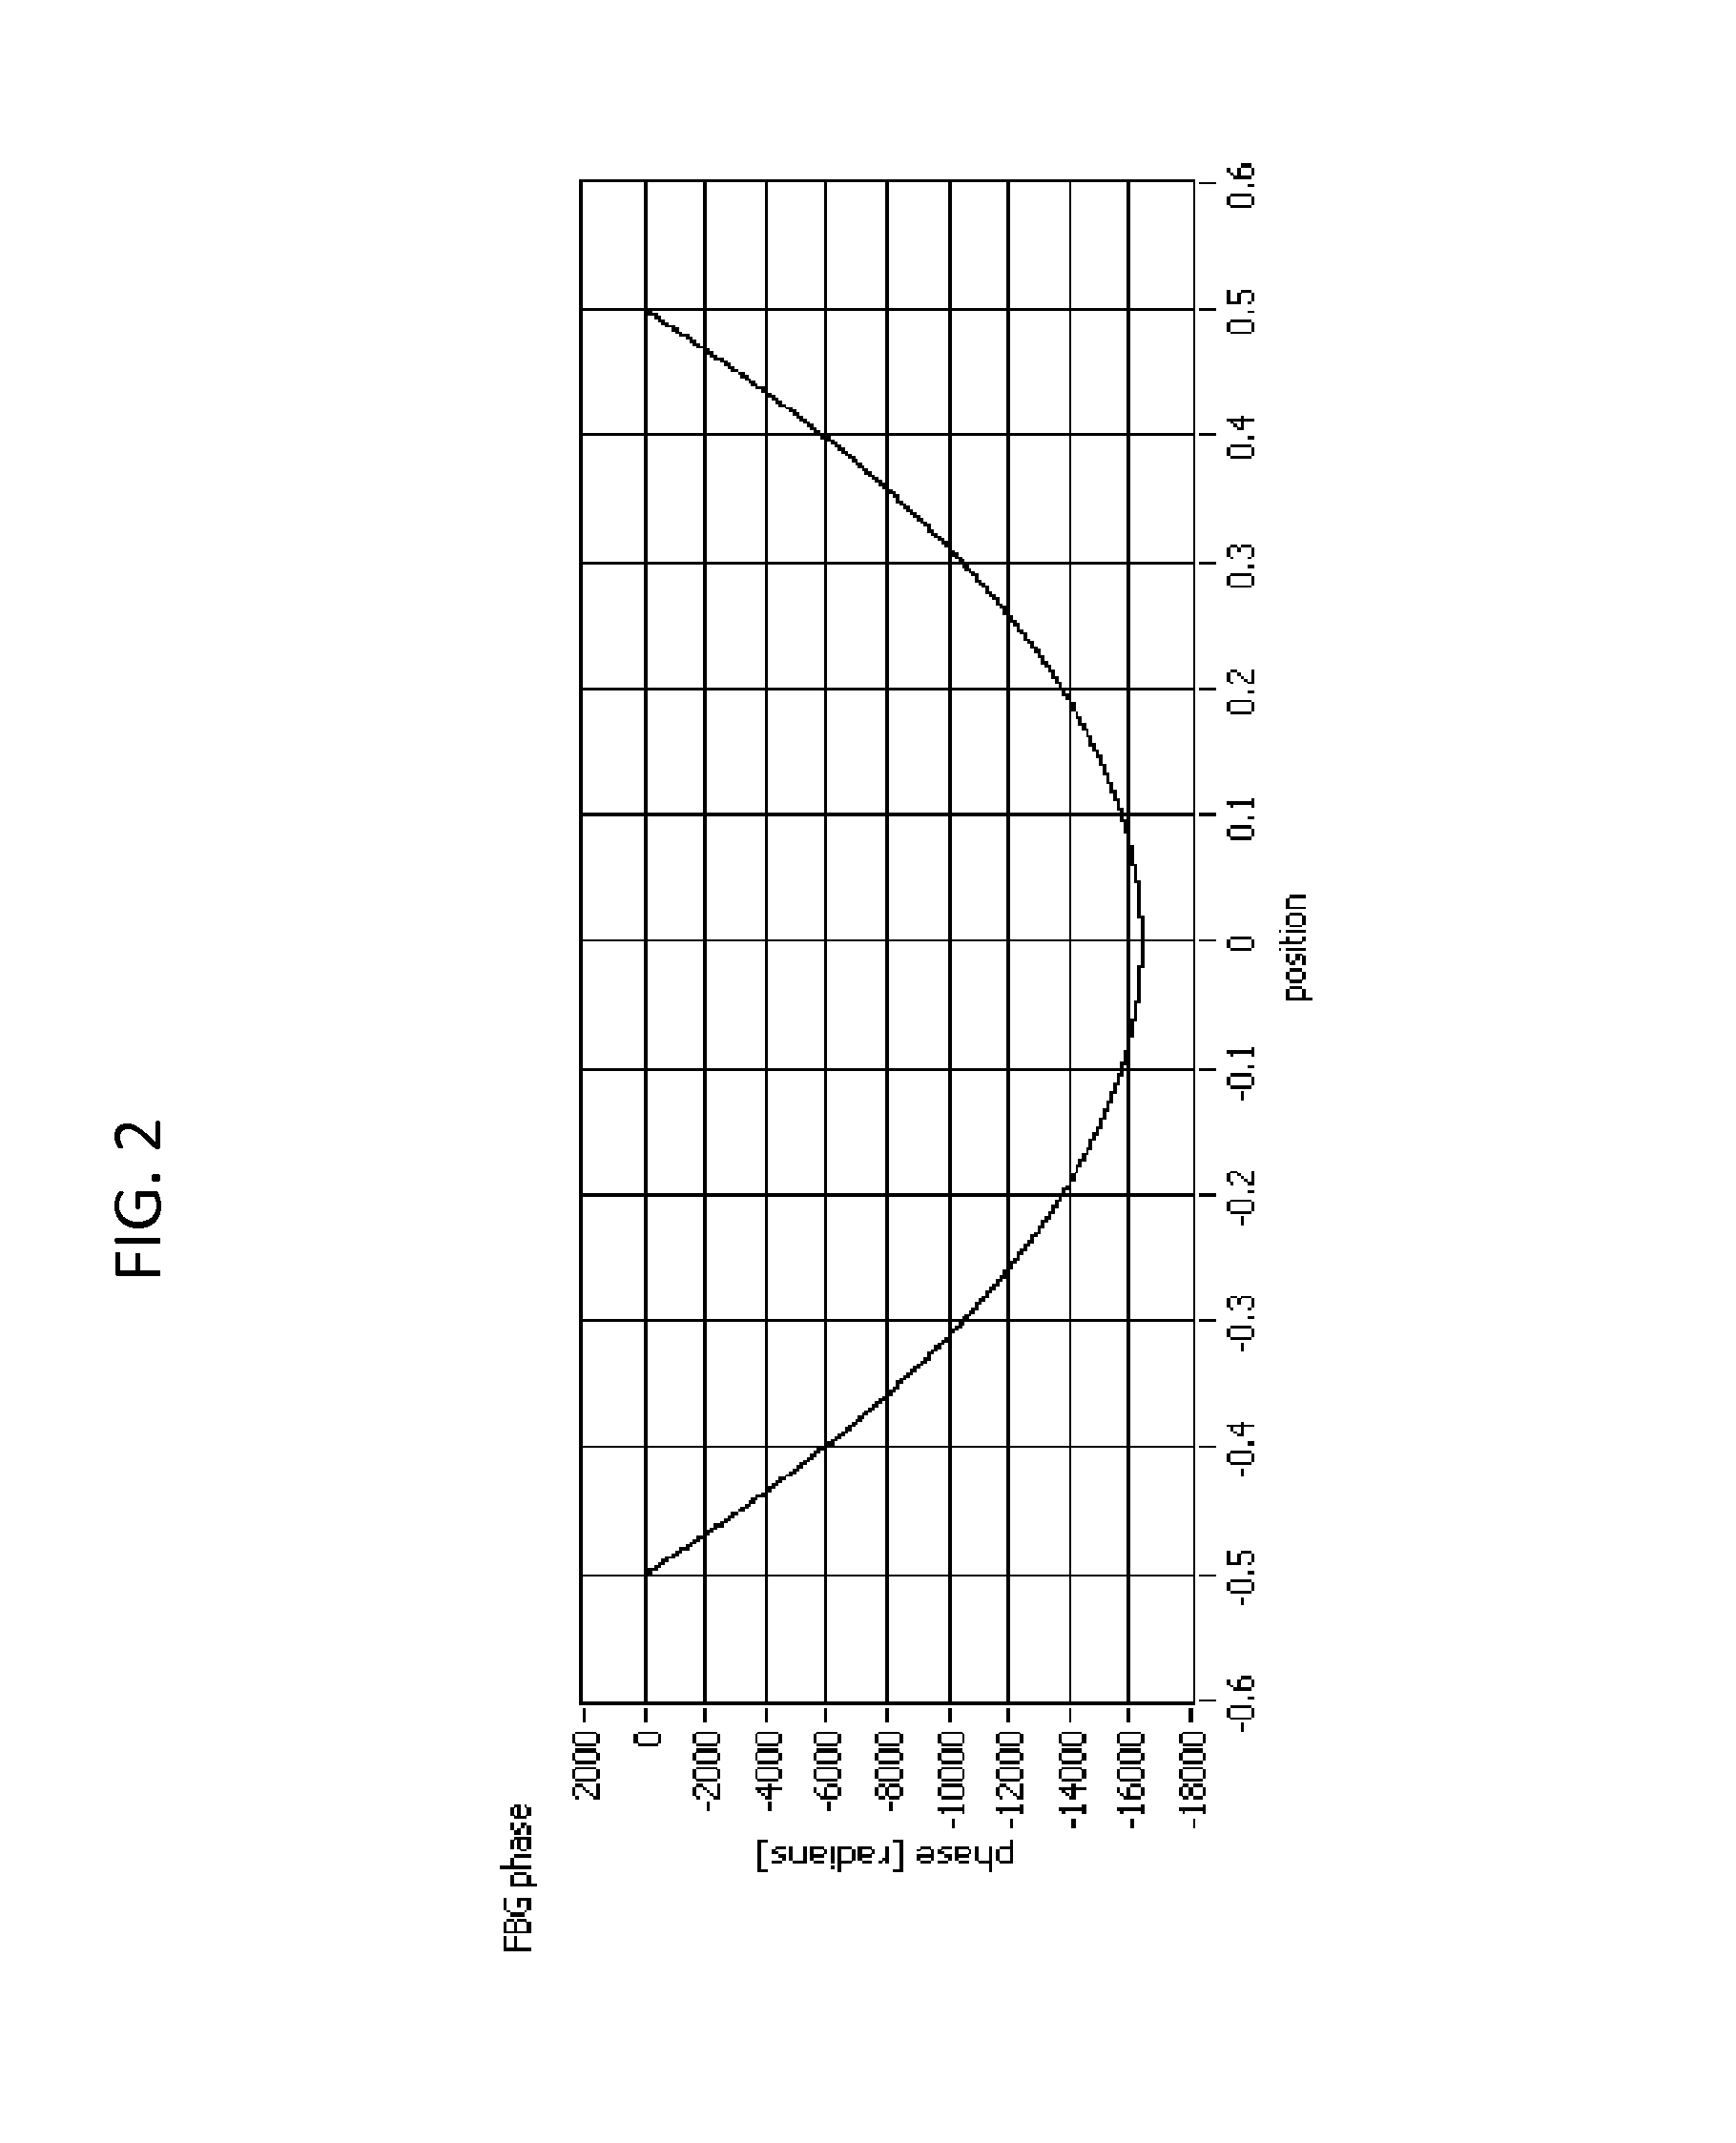 Optical sensing system for determining the position and/or shape of an associated object